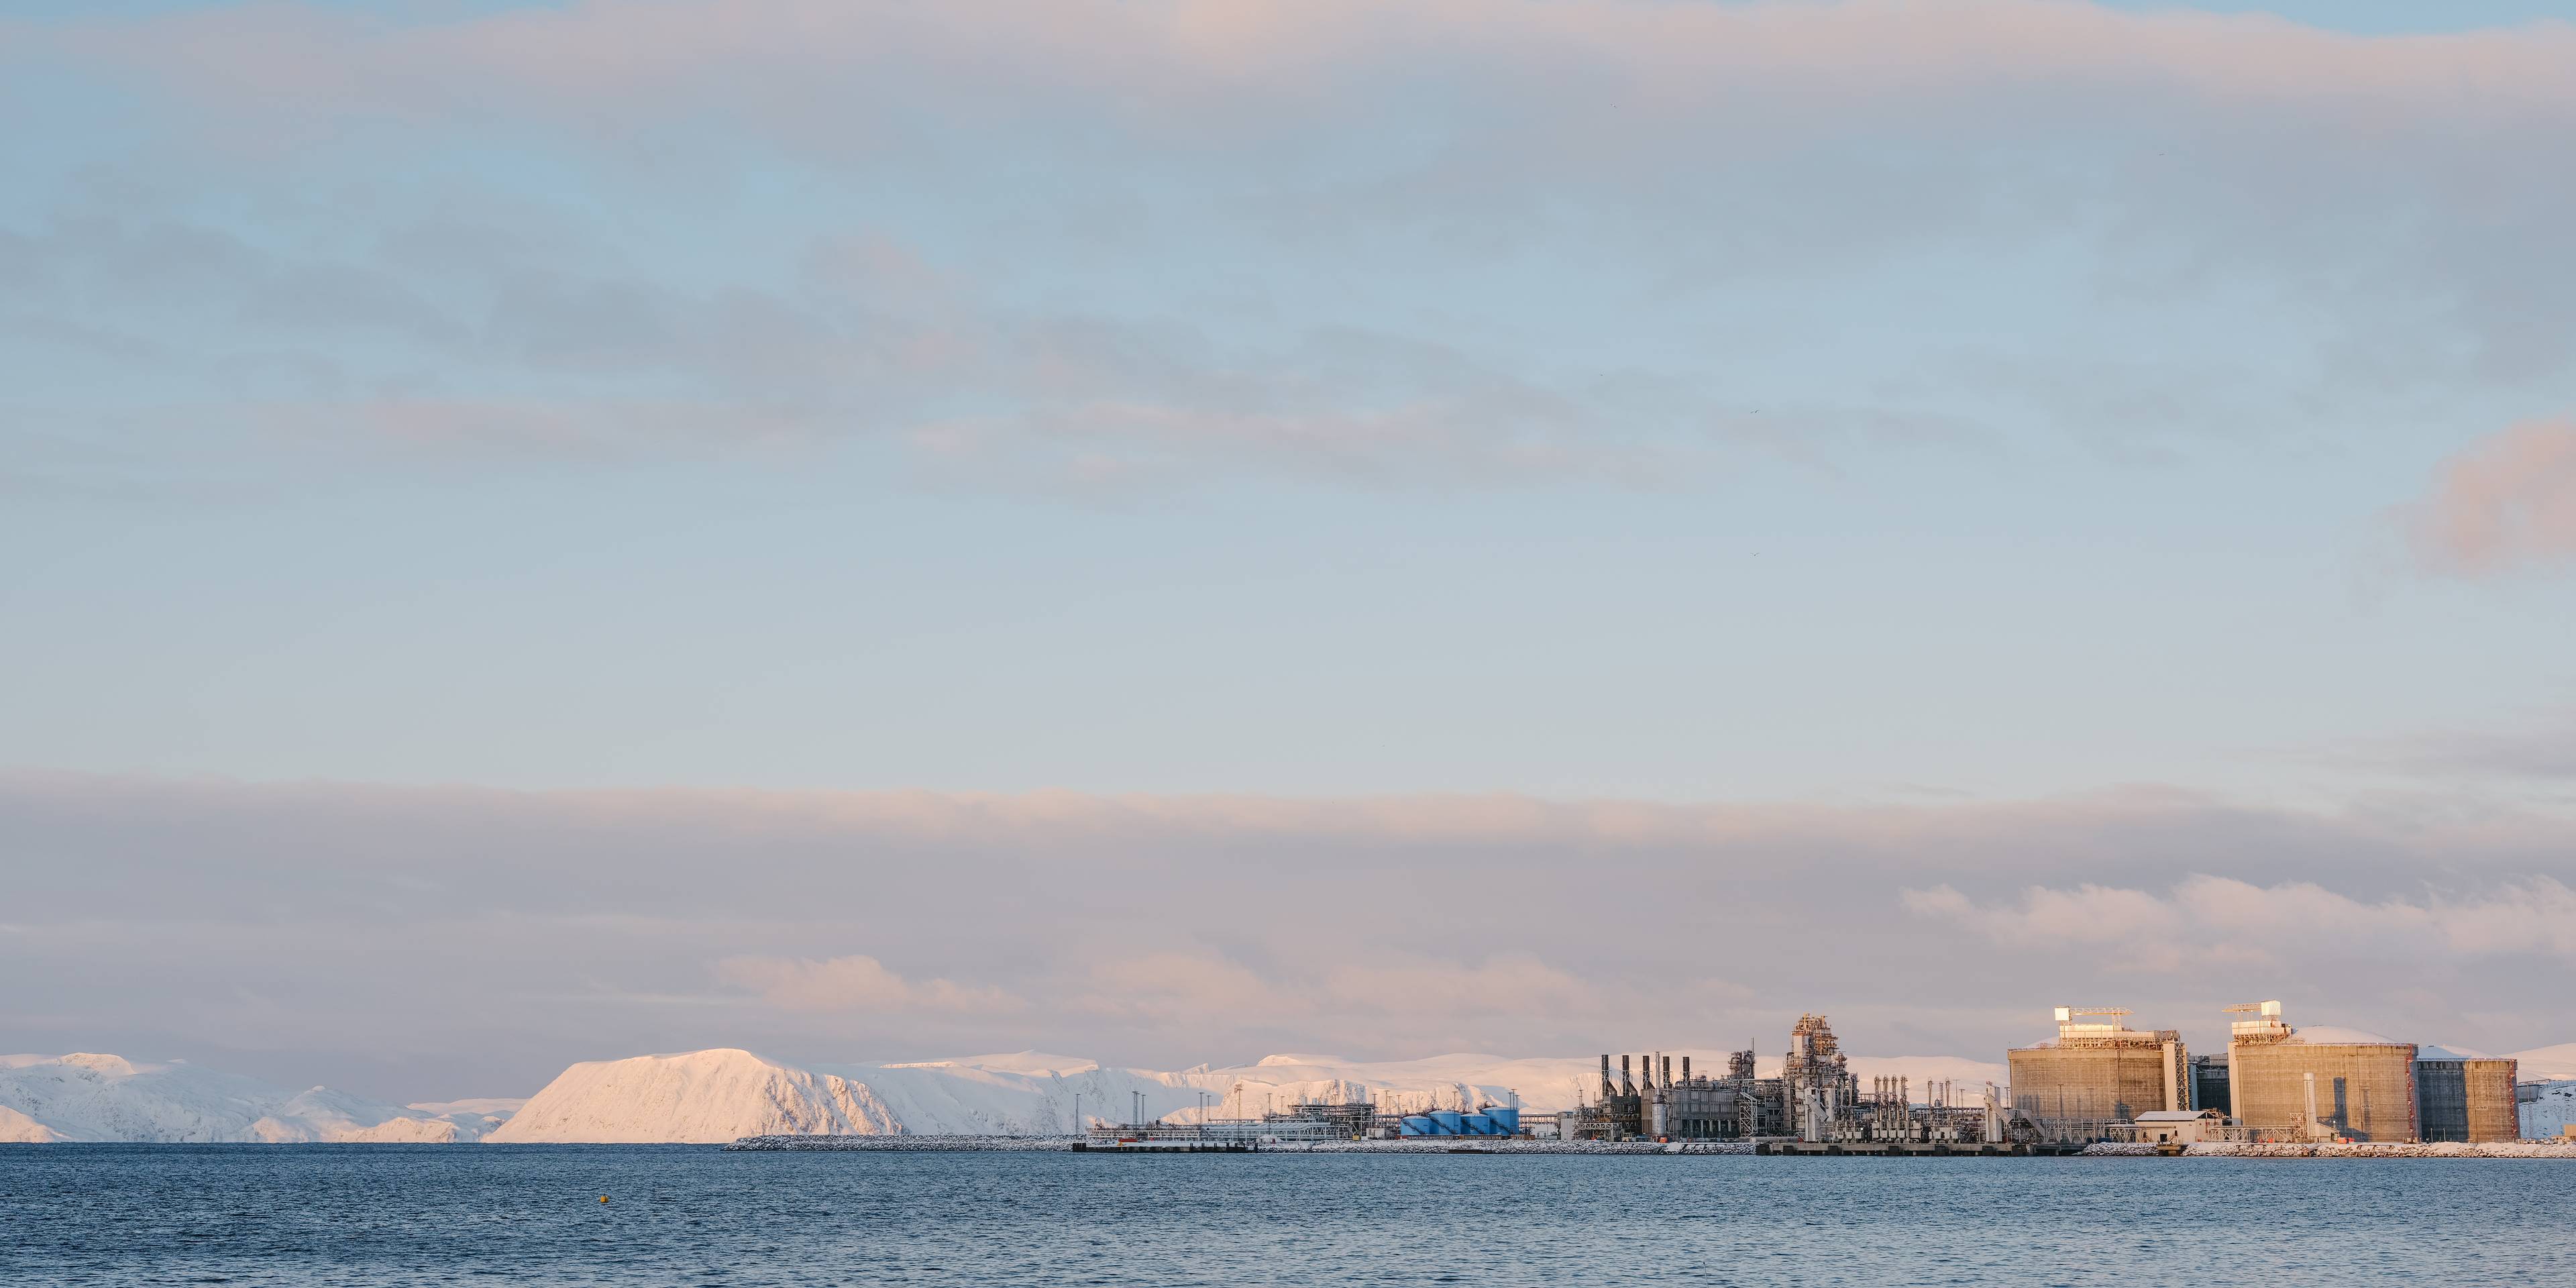 The Hammerfest LNG facility in the winter time